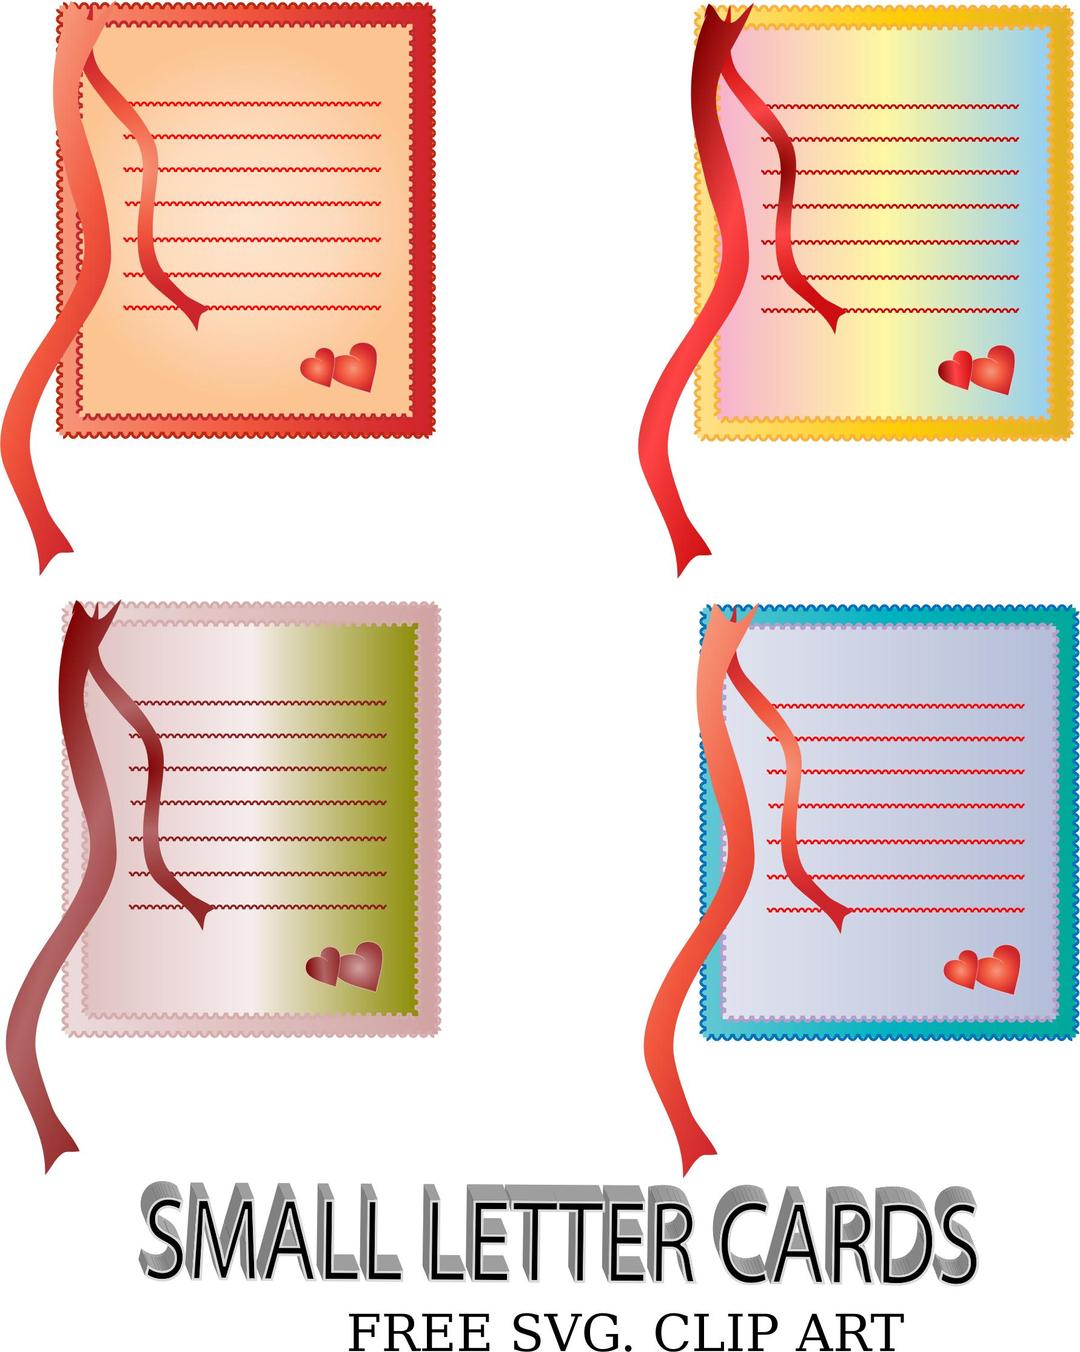 Small Letter Cards png transparent